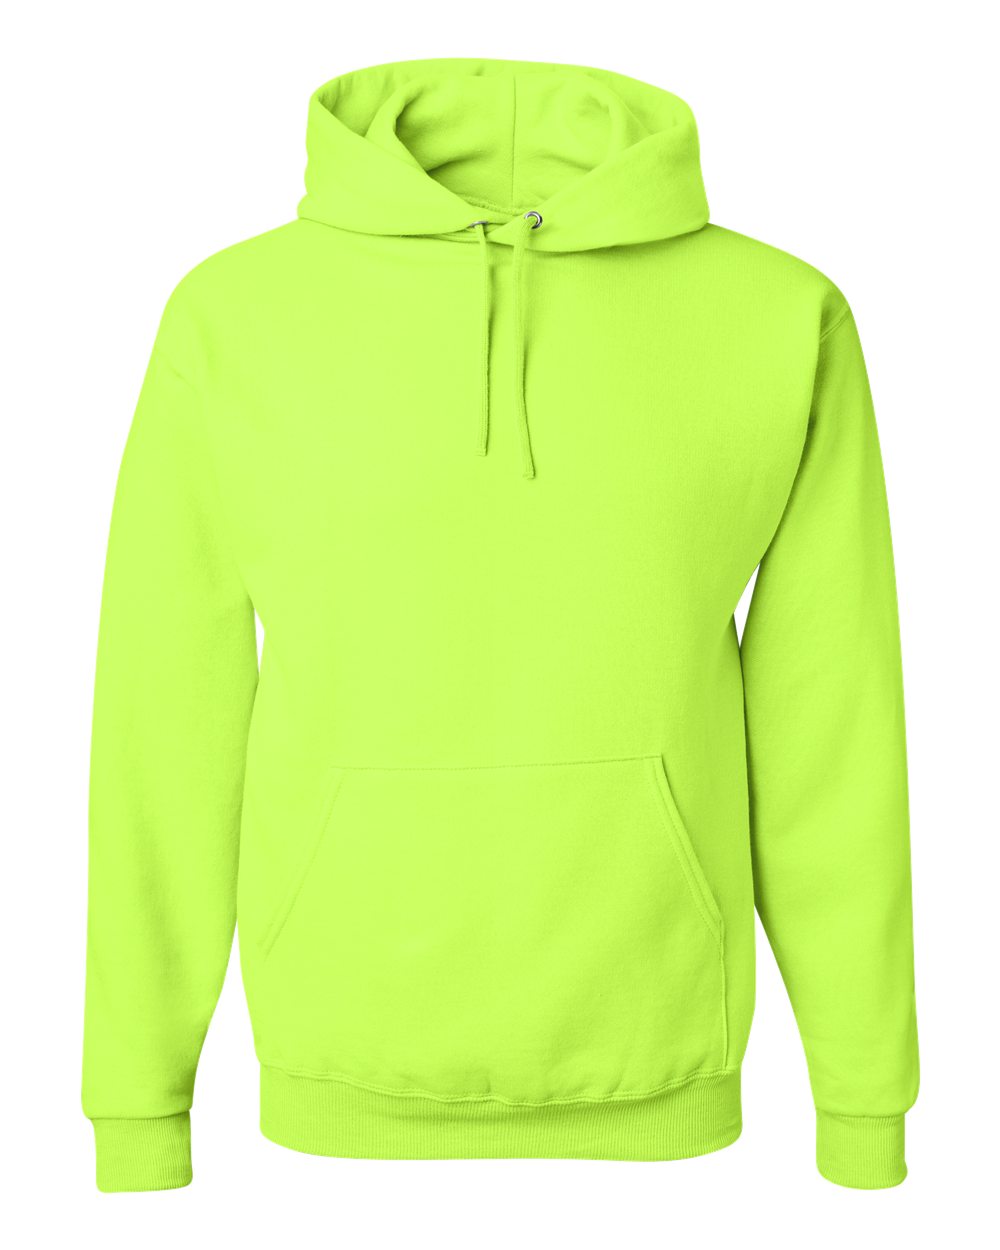 Jerzees Hoodie (996MR) in Safety Green